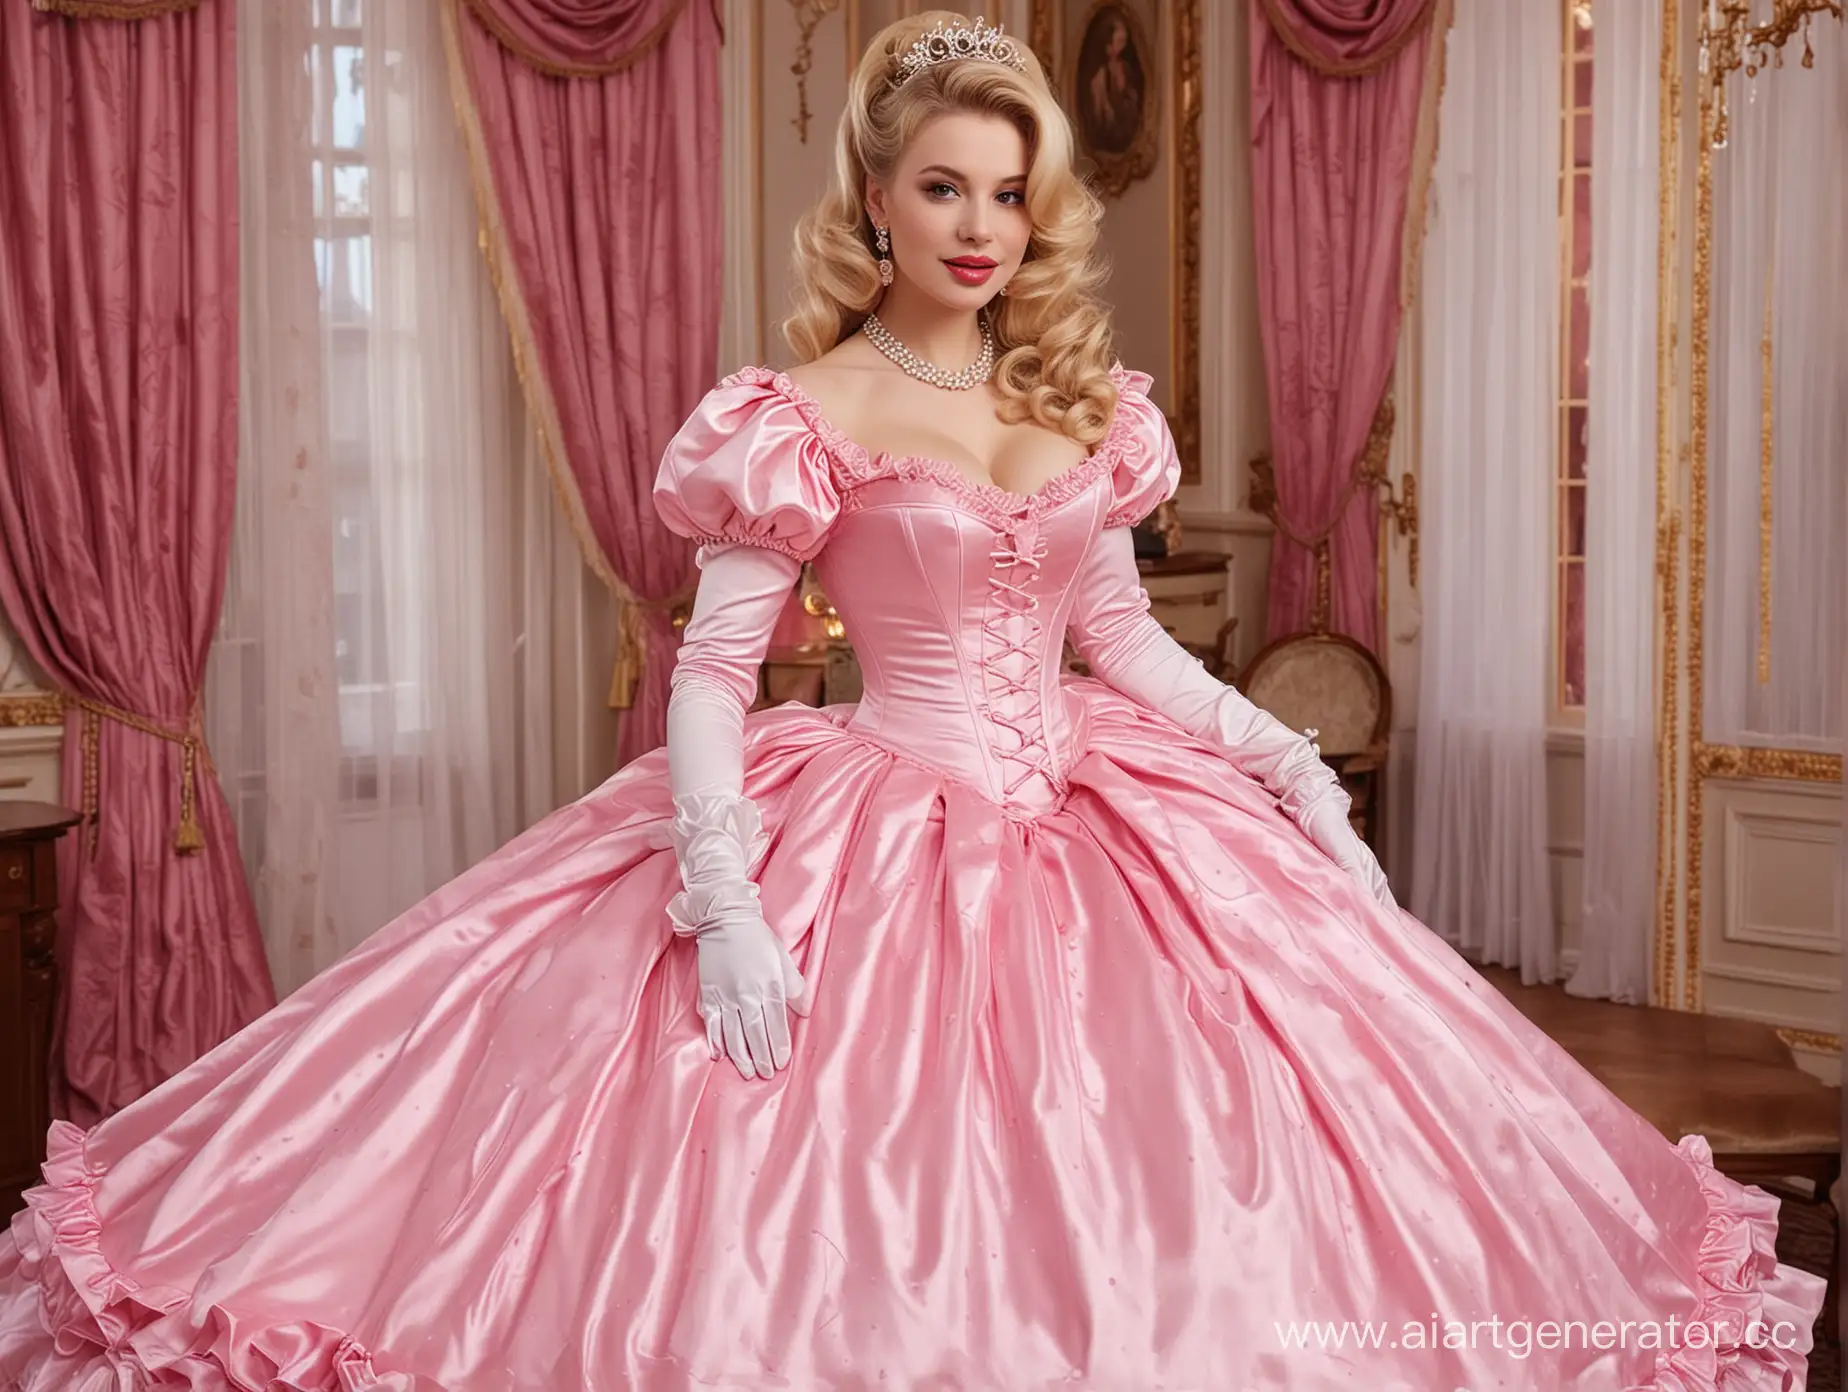 Regal-Princess-in-Pink-Dress-with-Steel-Corset-and-Lantern-Sleeves